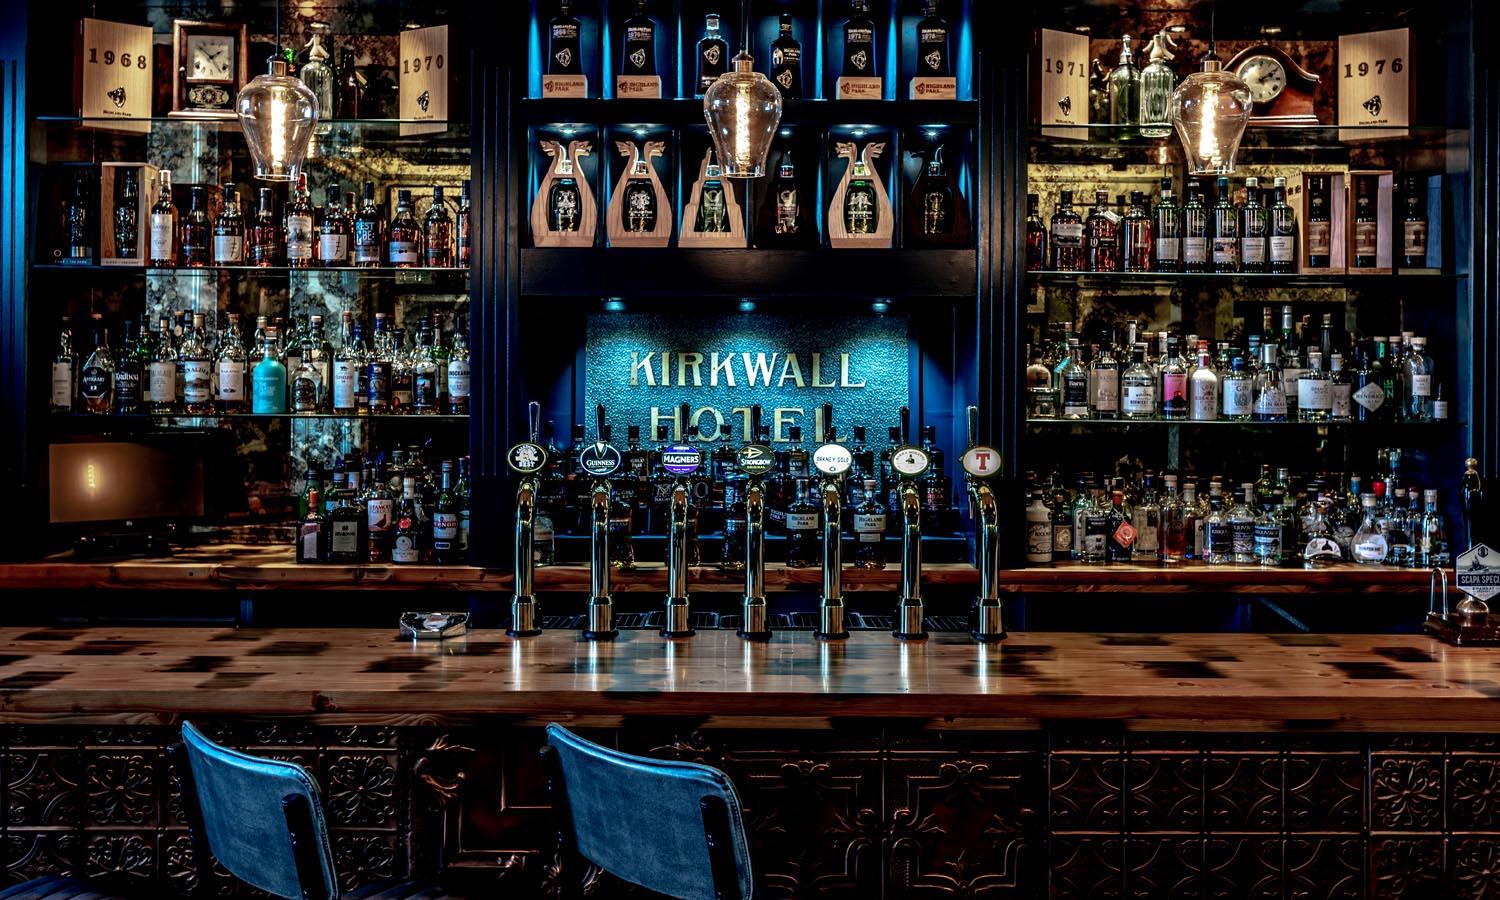 Sample a wide range of whiskies in the Highland Park Bar